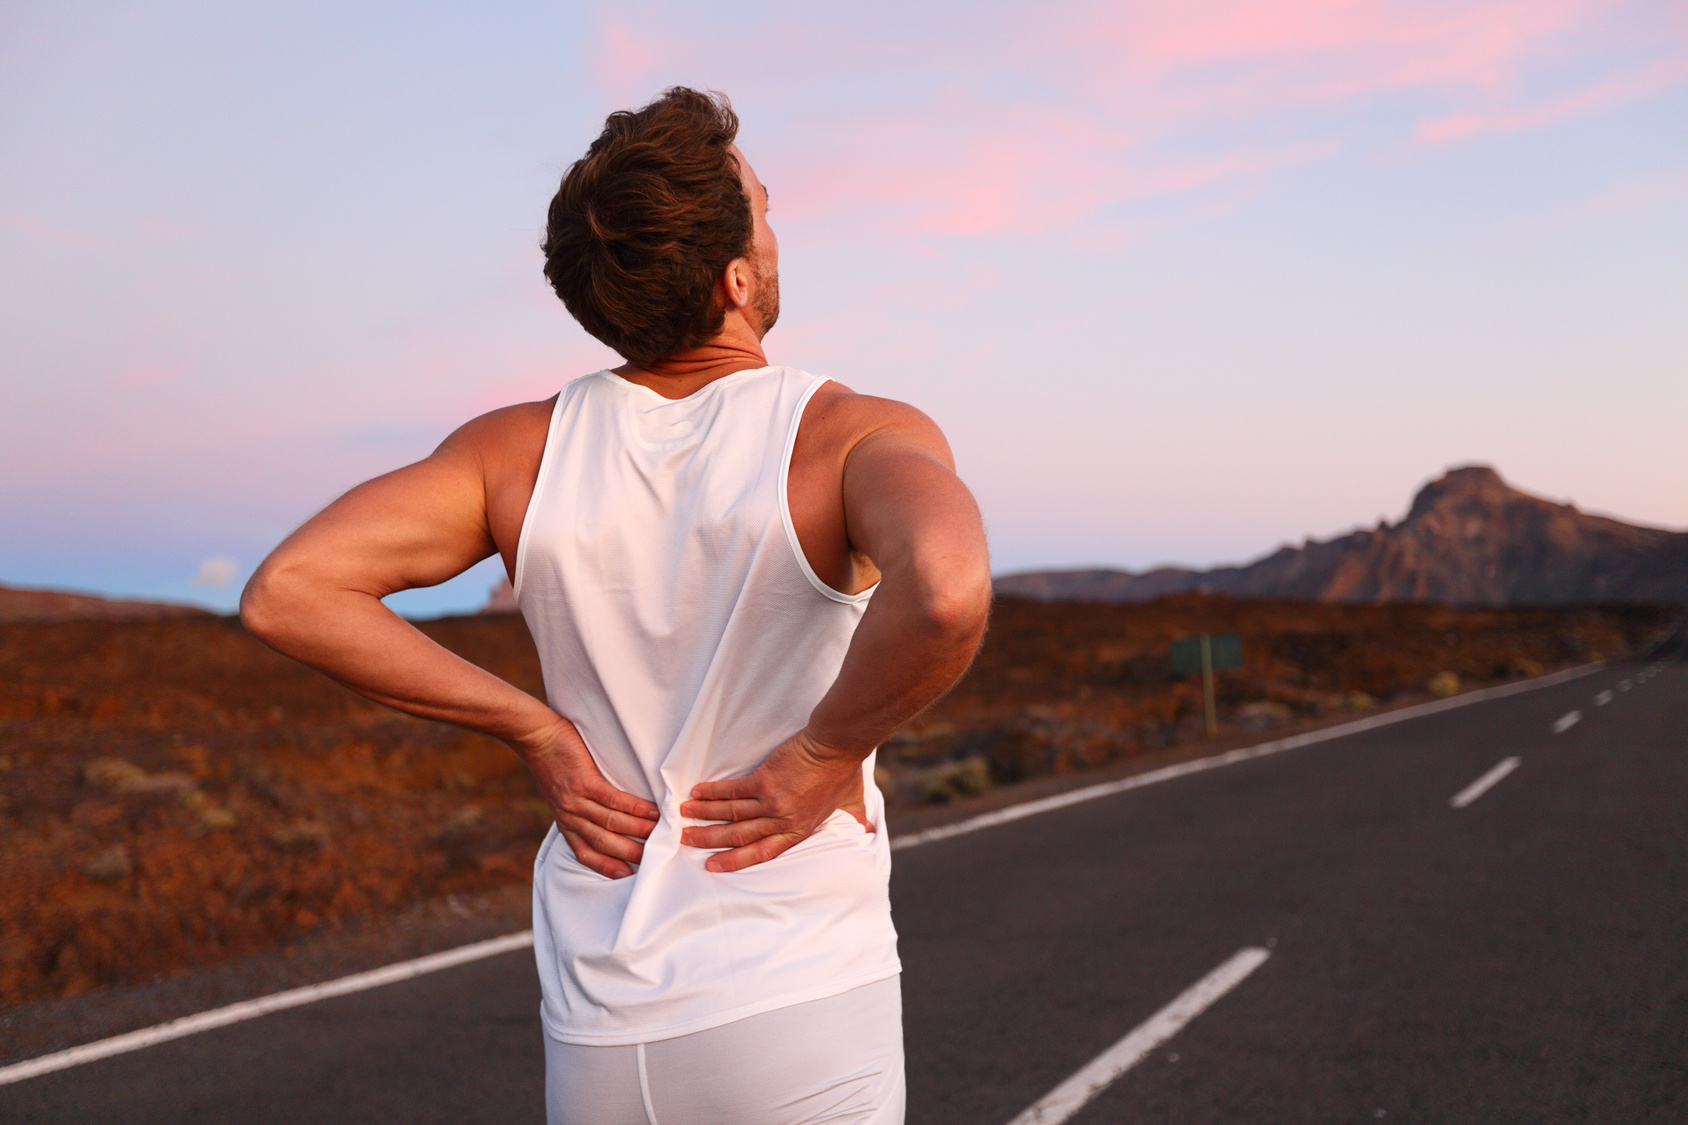 Back pain - Athletic running man with injury